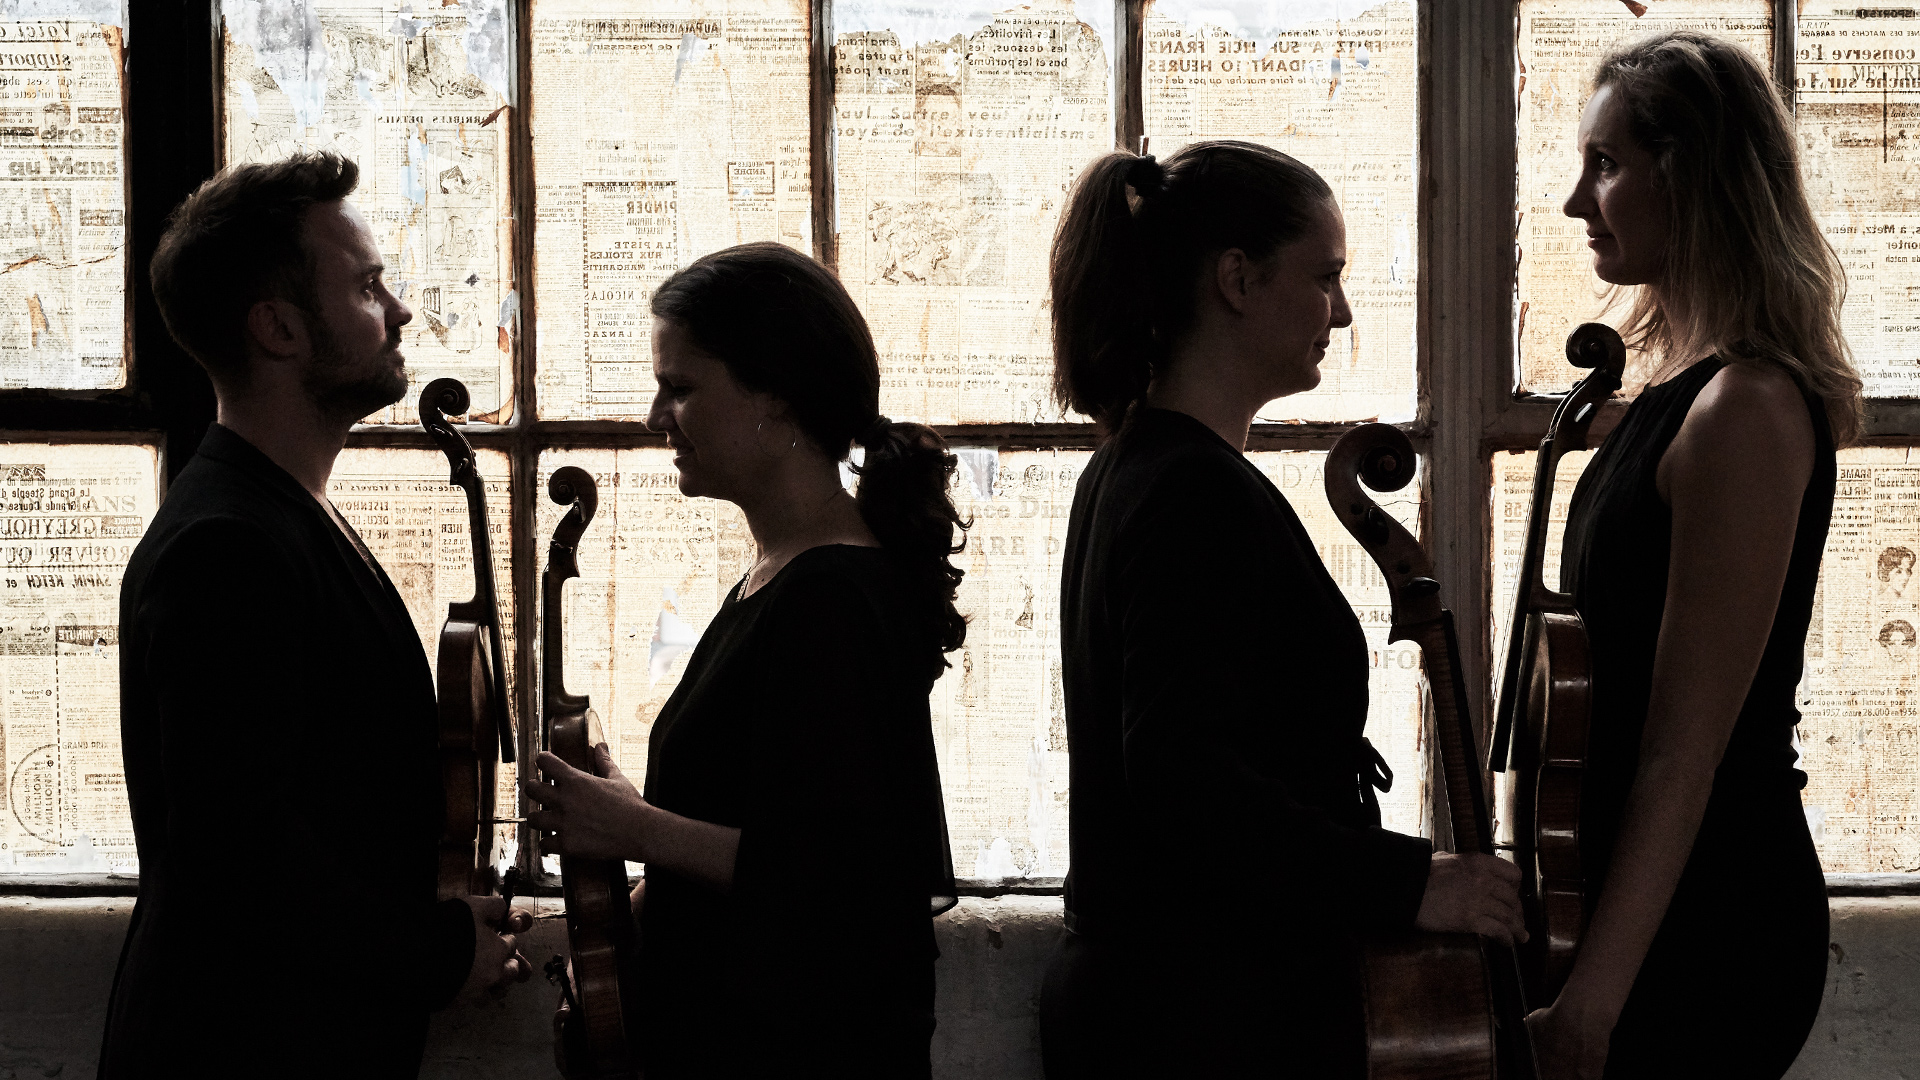 Members of the quartet in silhouettes holding their instruments 